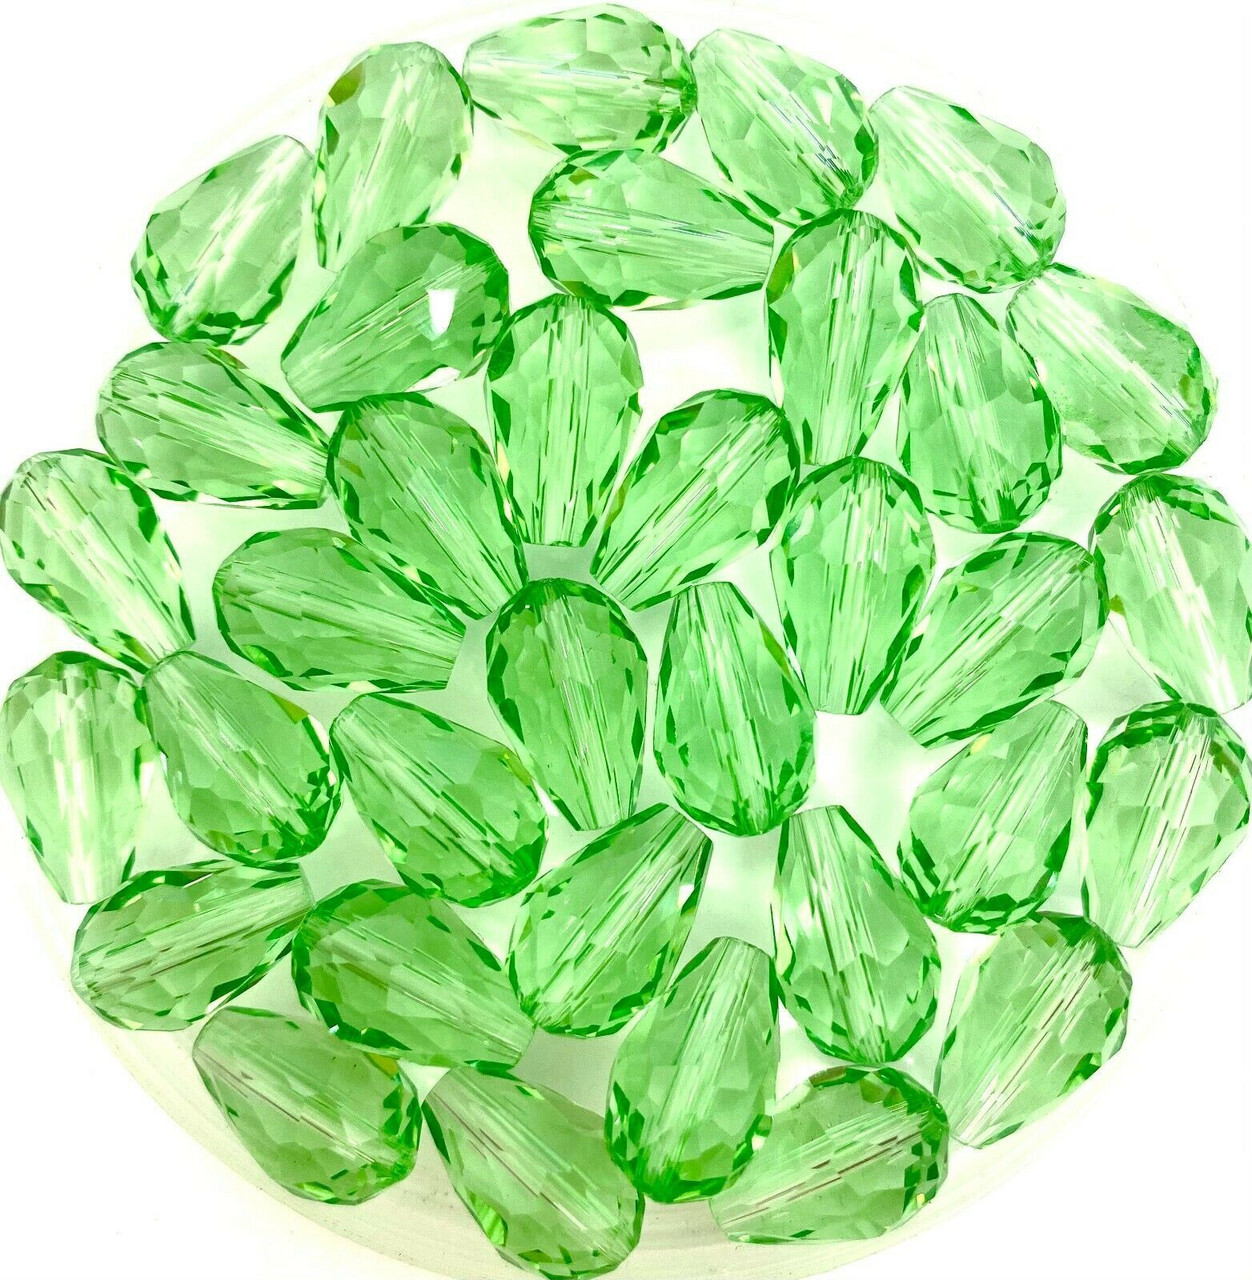 Strand of faceted drop glass beads (briolettes) - approx 7x5mm, Pale Green, approx 70 beads